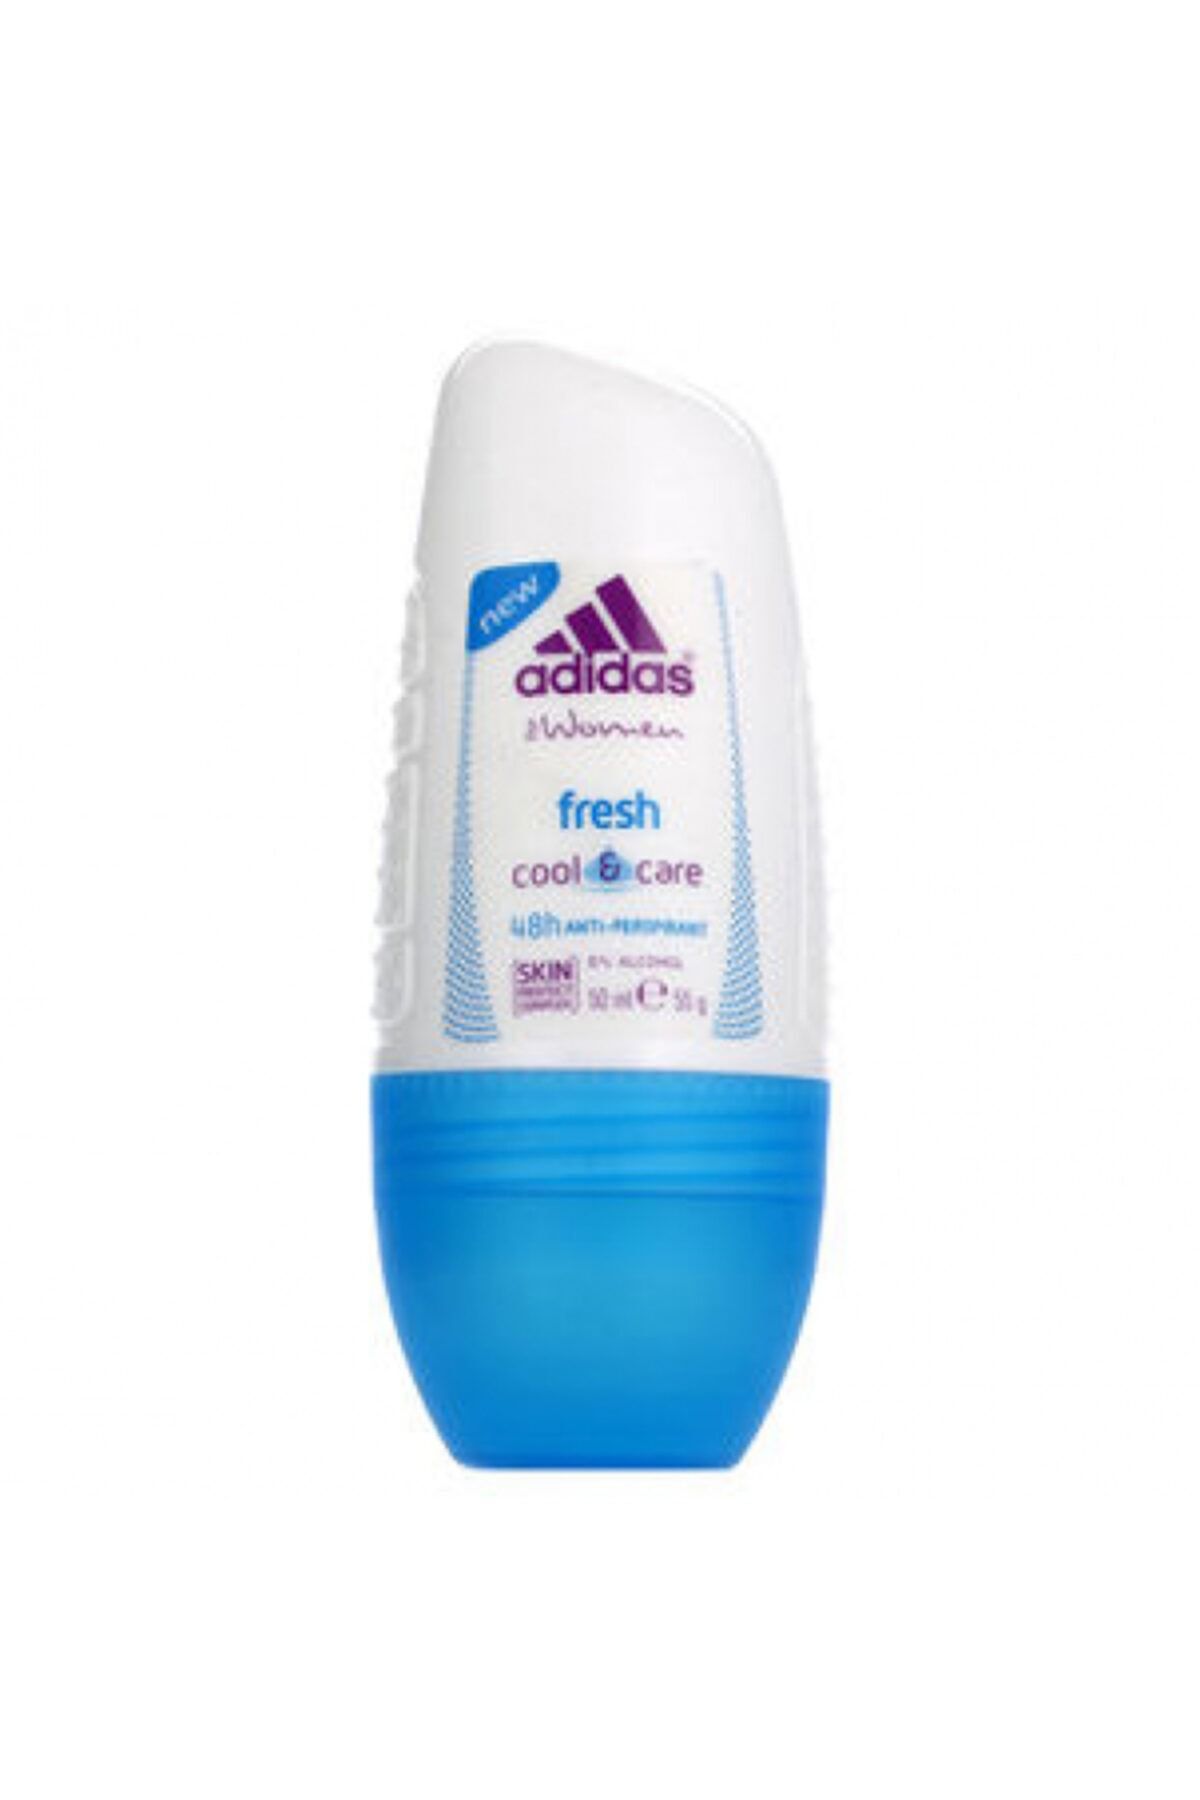 adidas Roll-on For Women 50ml Fresh Cool&care